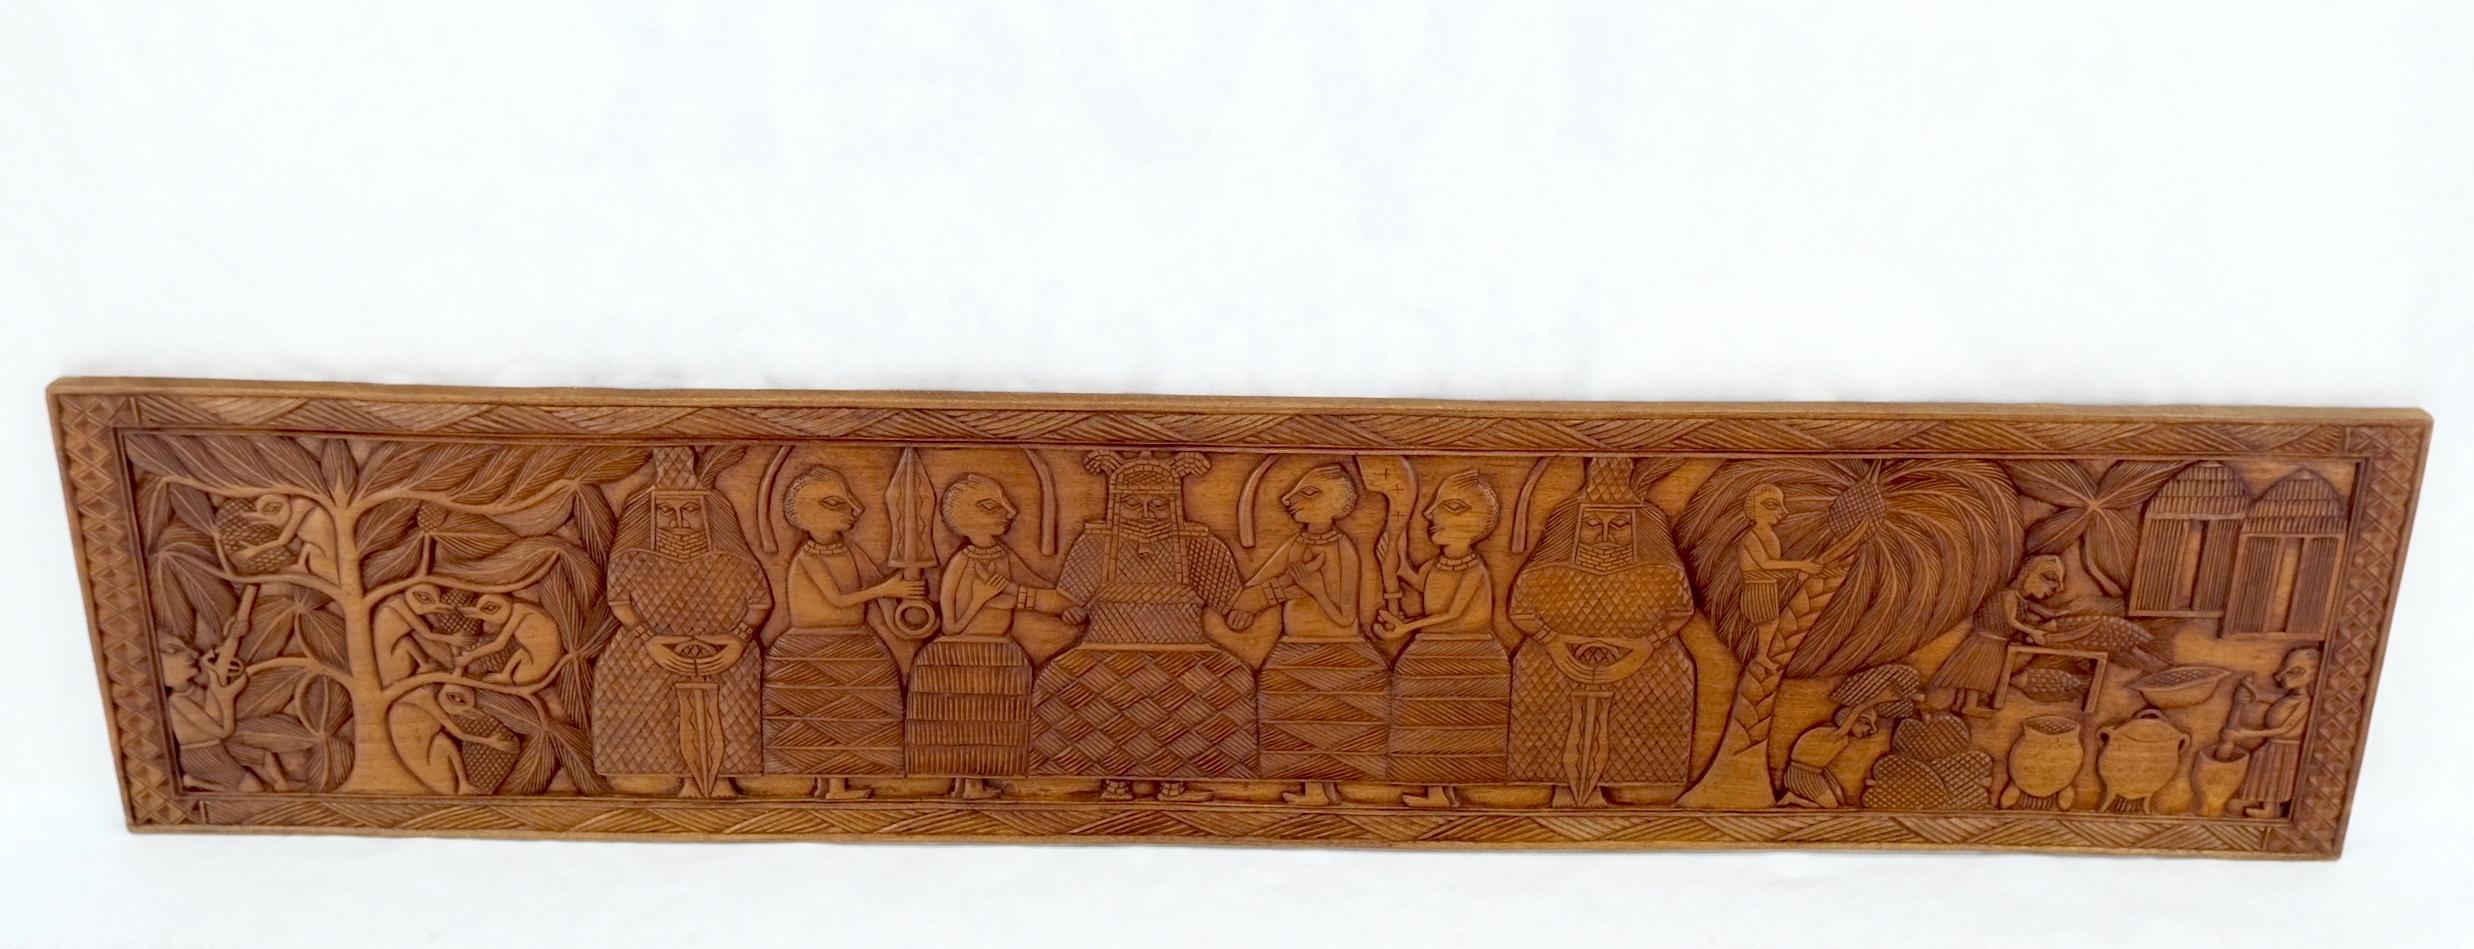 Large  Carved Solid Teak Long Rectangle Wall Plaque Relief Sculpture Depicting Jangle Villagers.